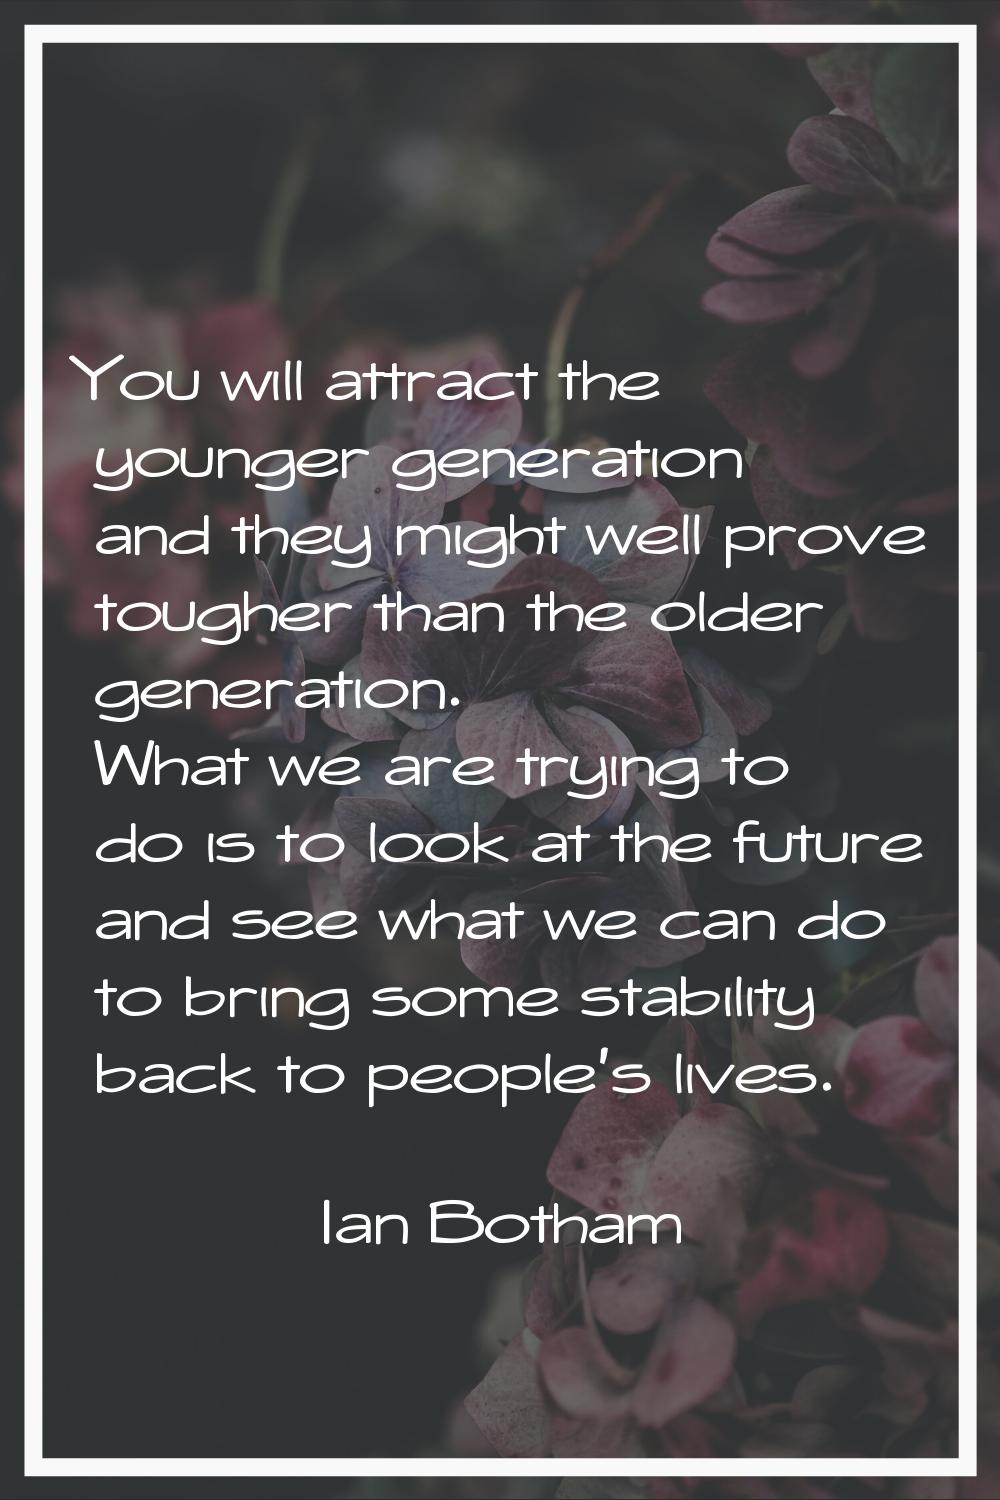 You will attract the younger generation and they might well prove tougher than the older generation